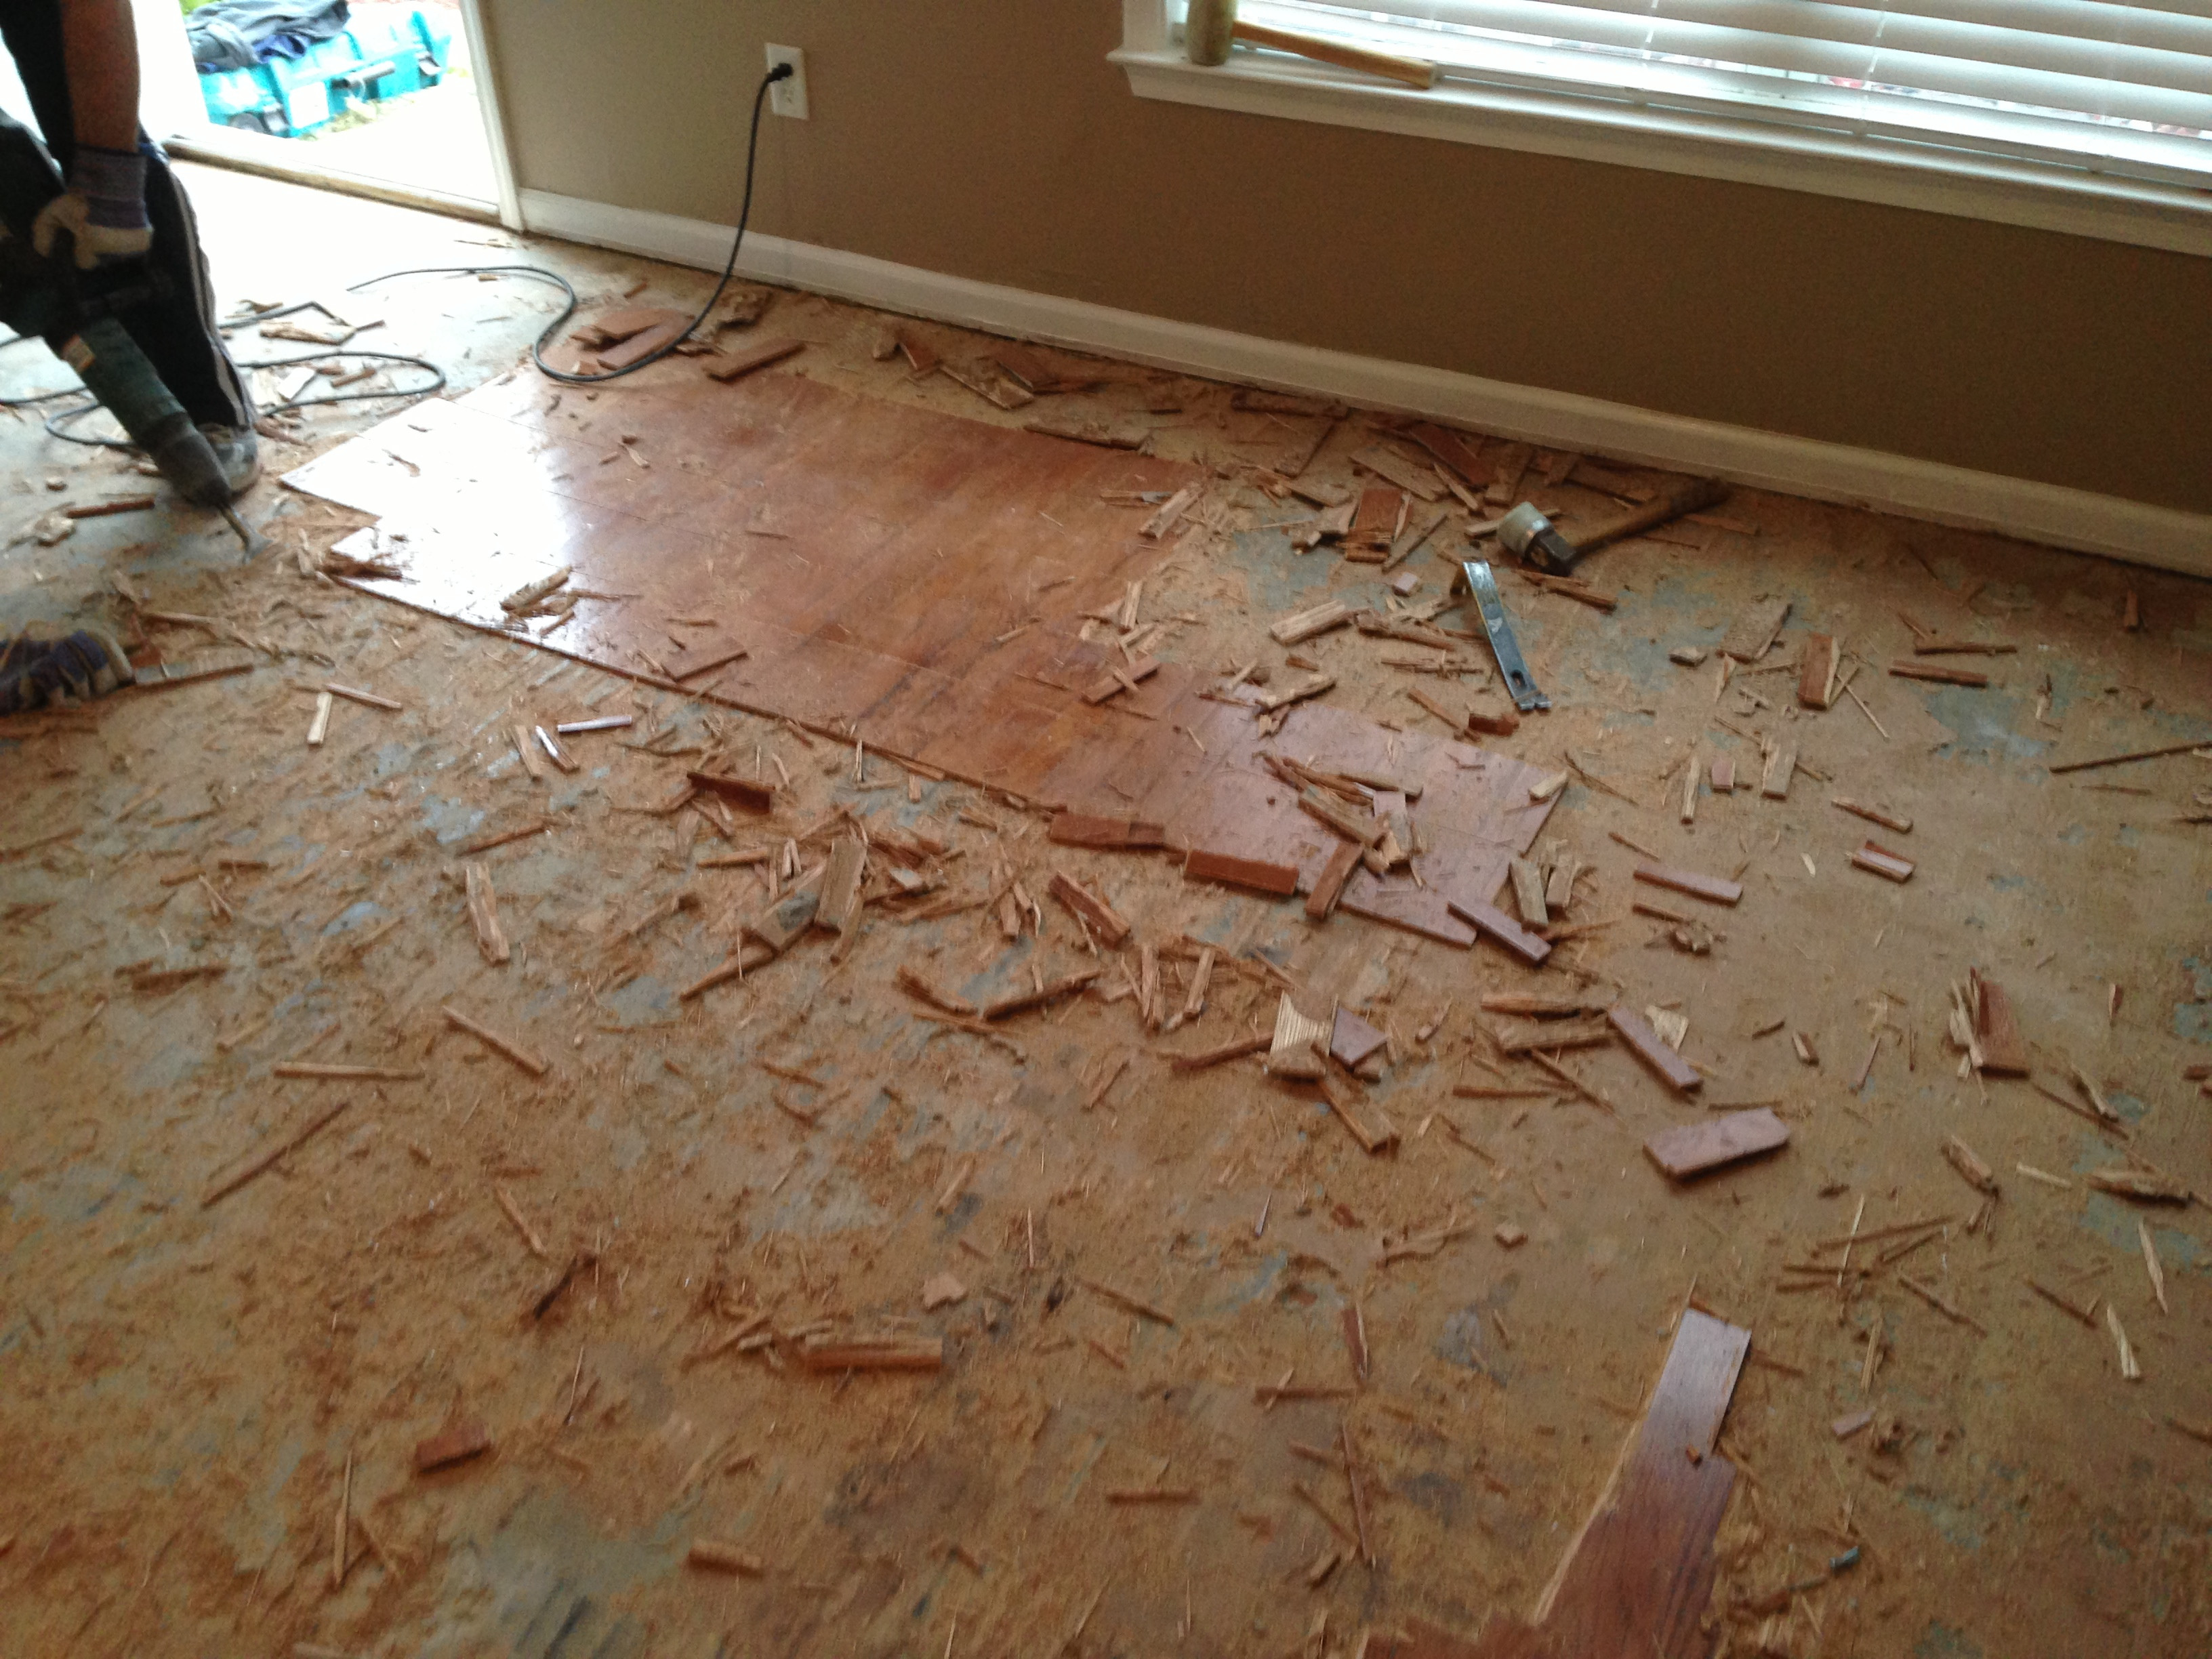 25 Nice How Much Does Restaining Hardwood Floors Cost 2023 free download how much does restaining hardwood floors cost of estimate cost of hardwood floors installed hardwood floor estimator with hardwood floor cost for what is the labor installation decor costco